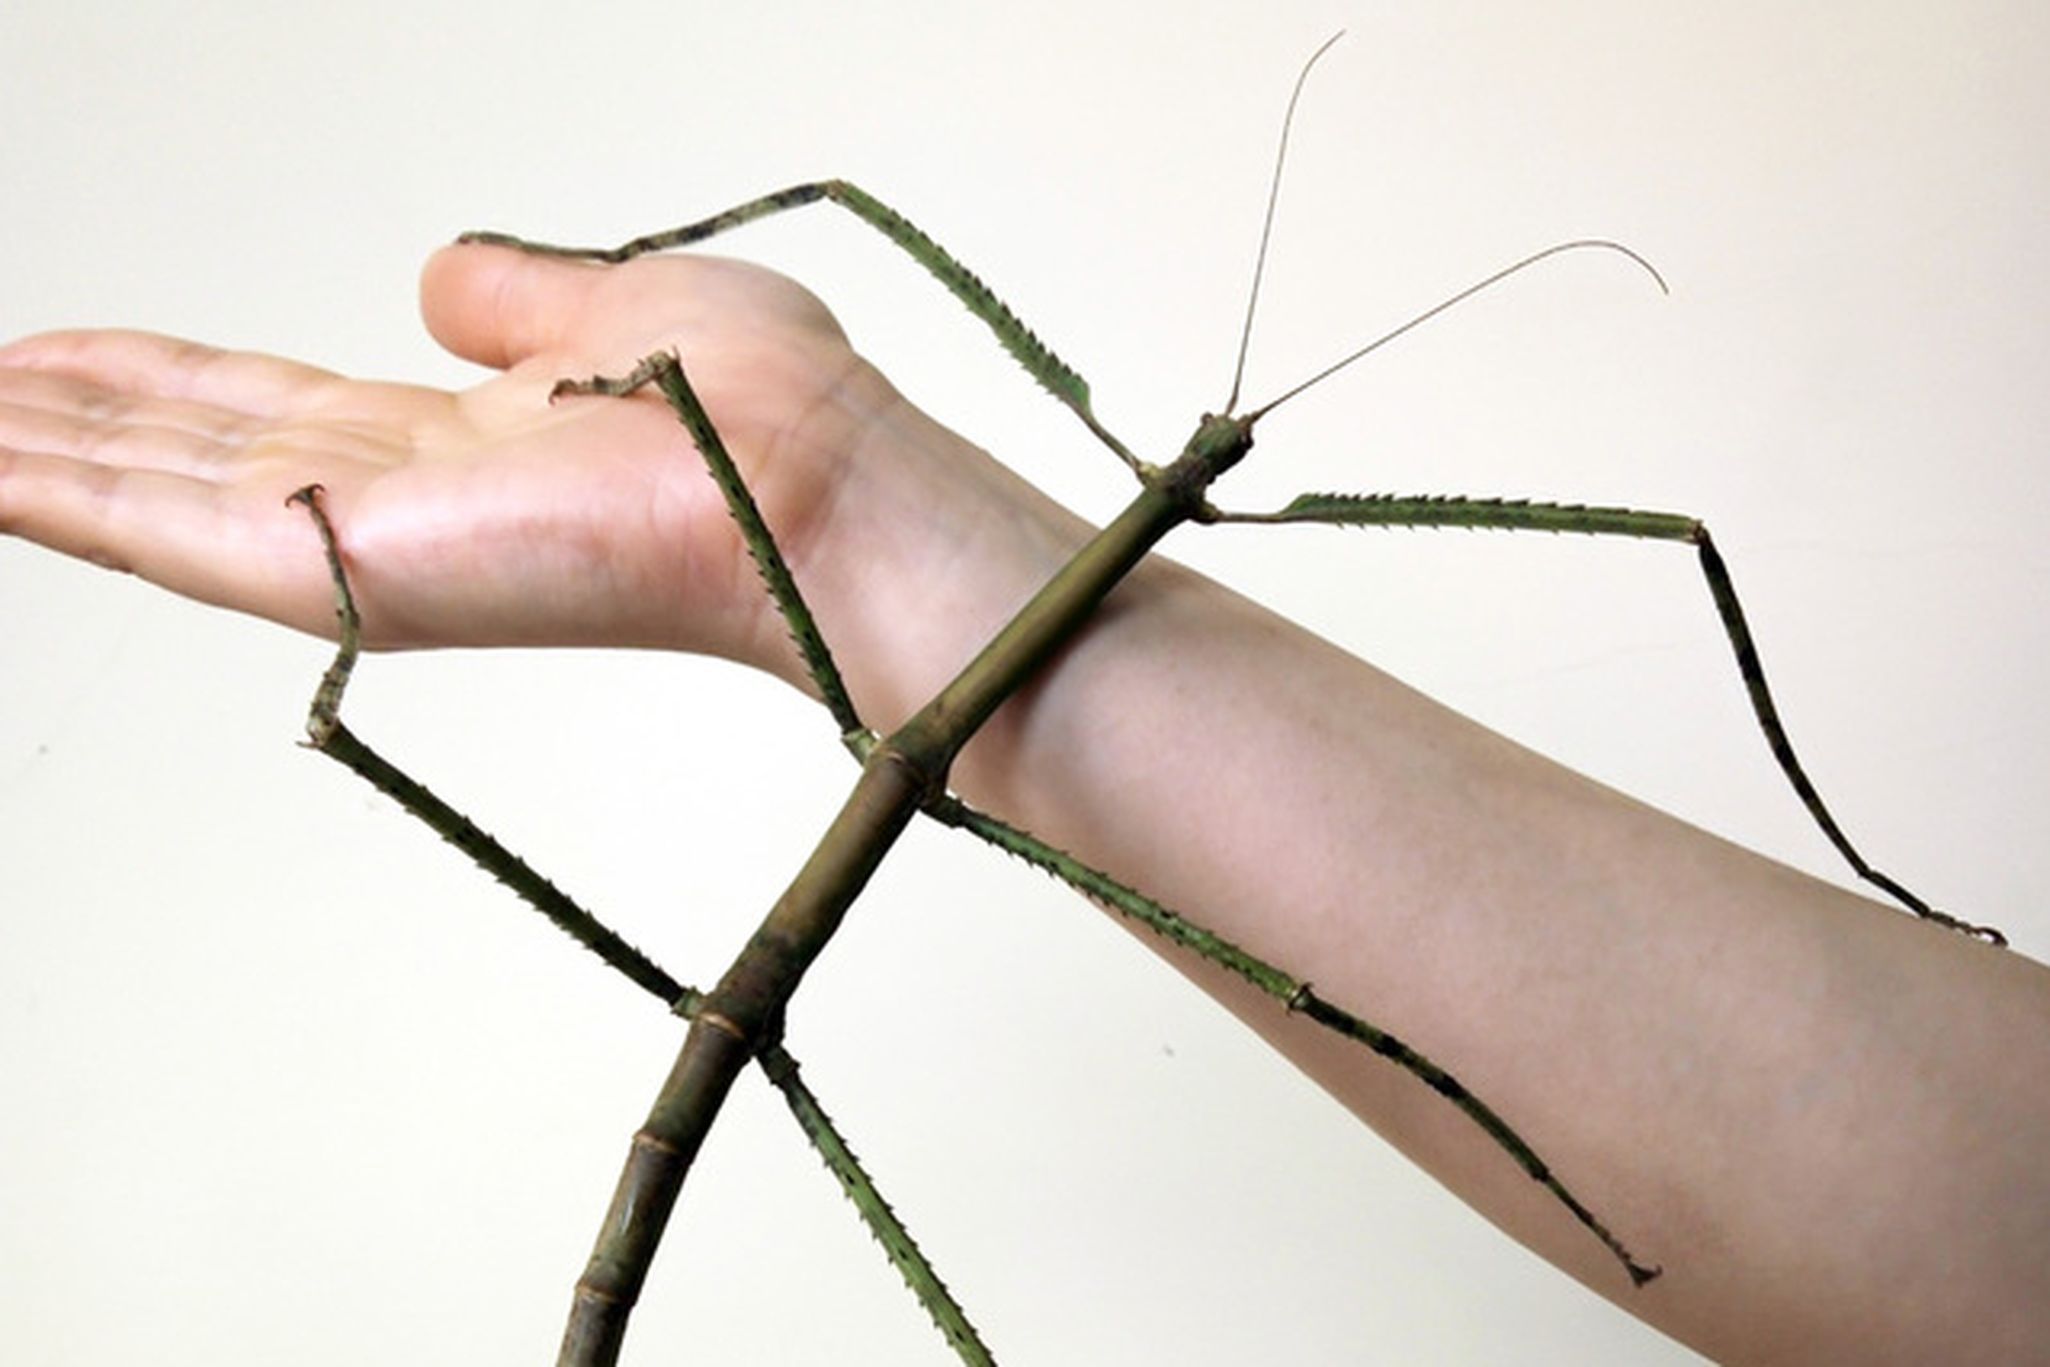 Phobaeticus kirbyi – Stick insect